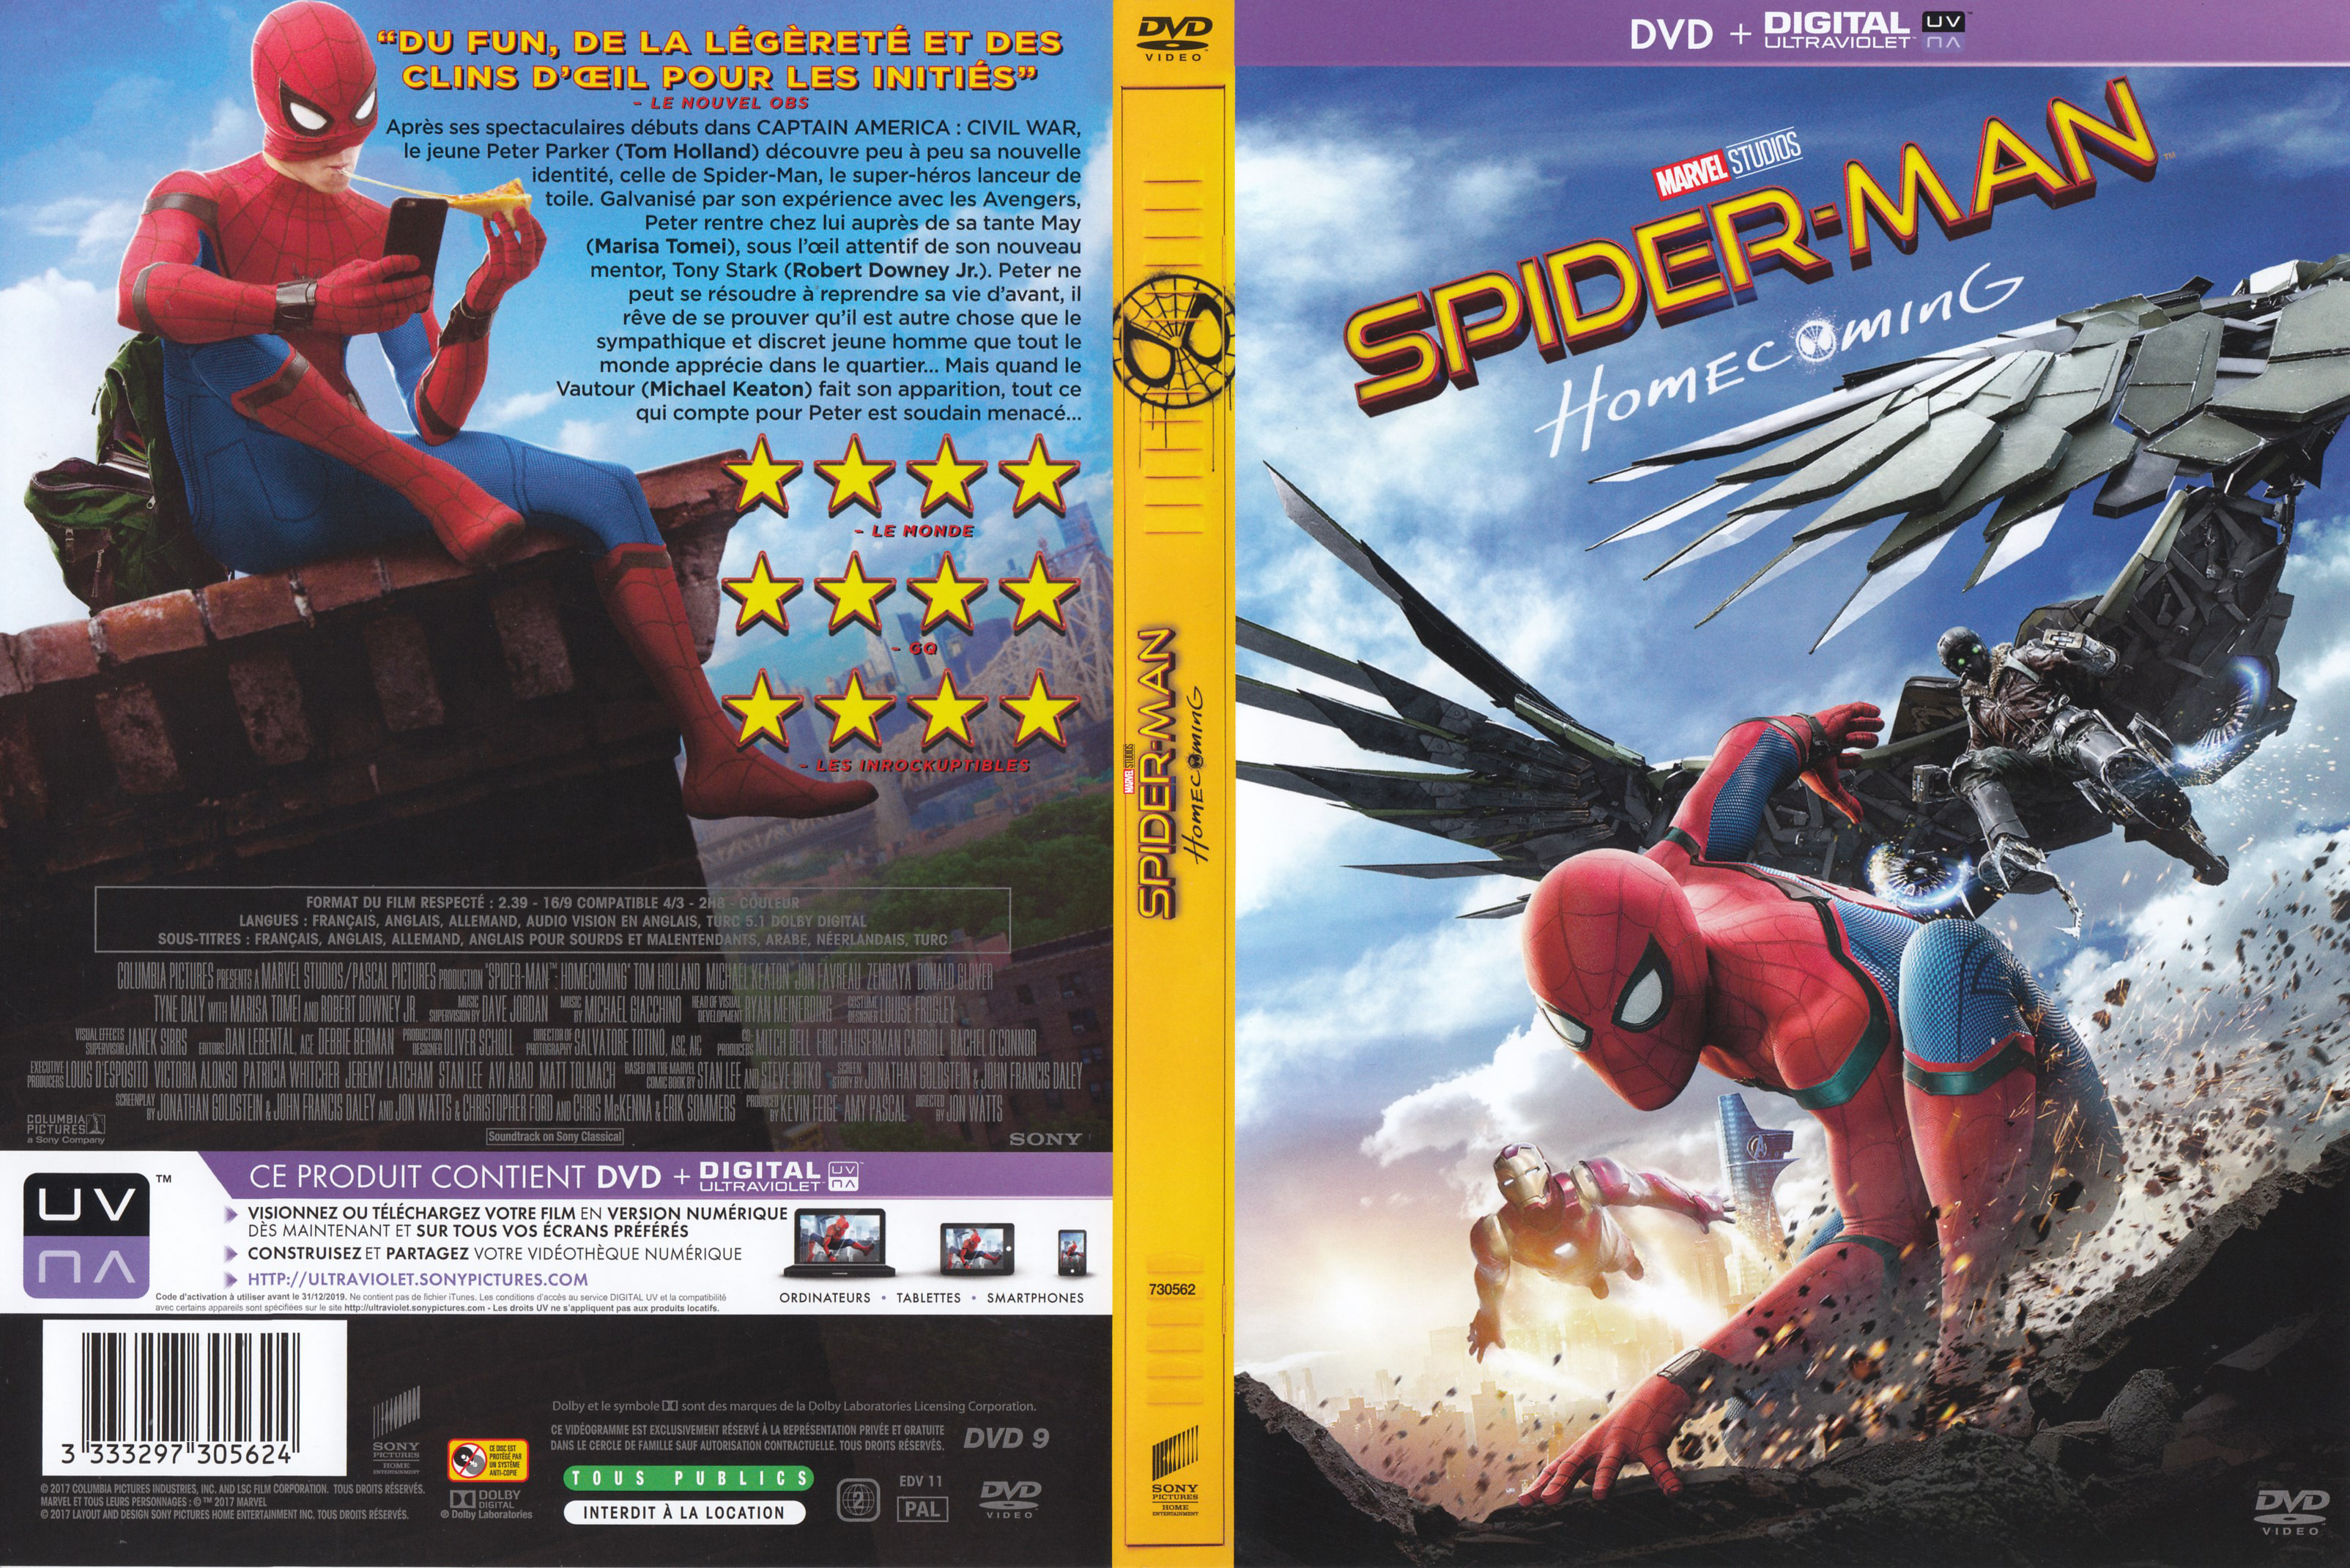 Jaquette DVD Spider-Man: Homecoming